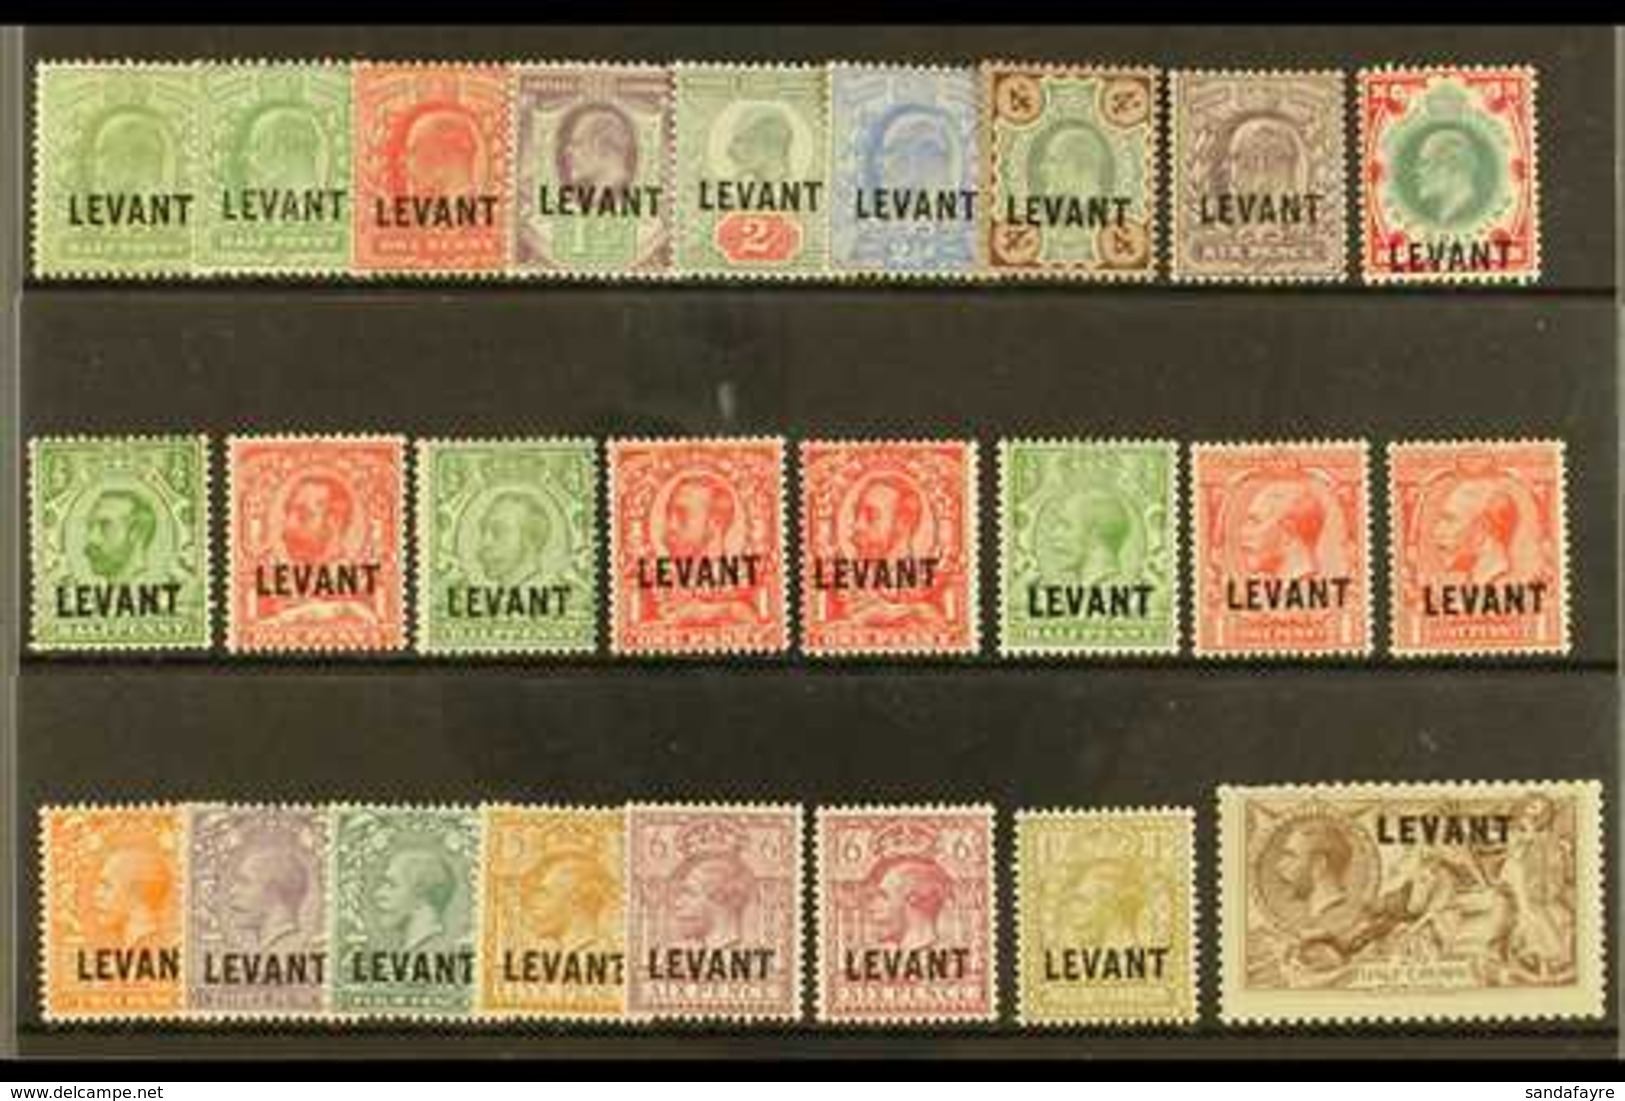 BRITISH CURRENCY 1905-21 MINT COLLECTION. An Attractive, All Different Mint "LEVANT" Opt'd Group That Includes 1905-12 R - Brits-Levant